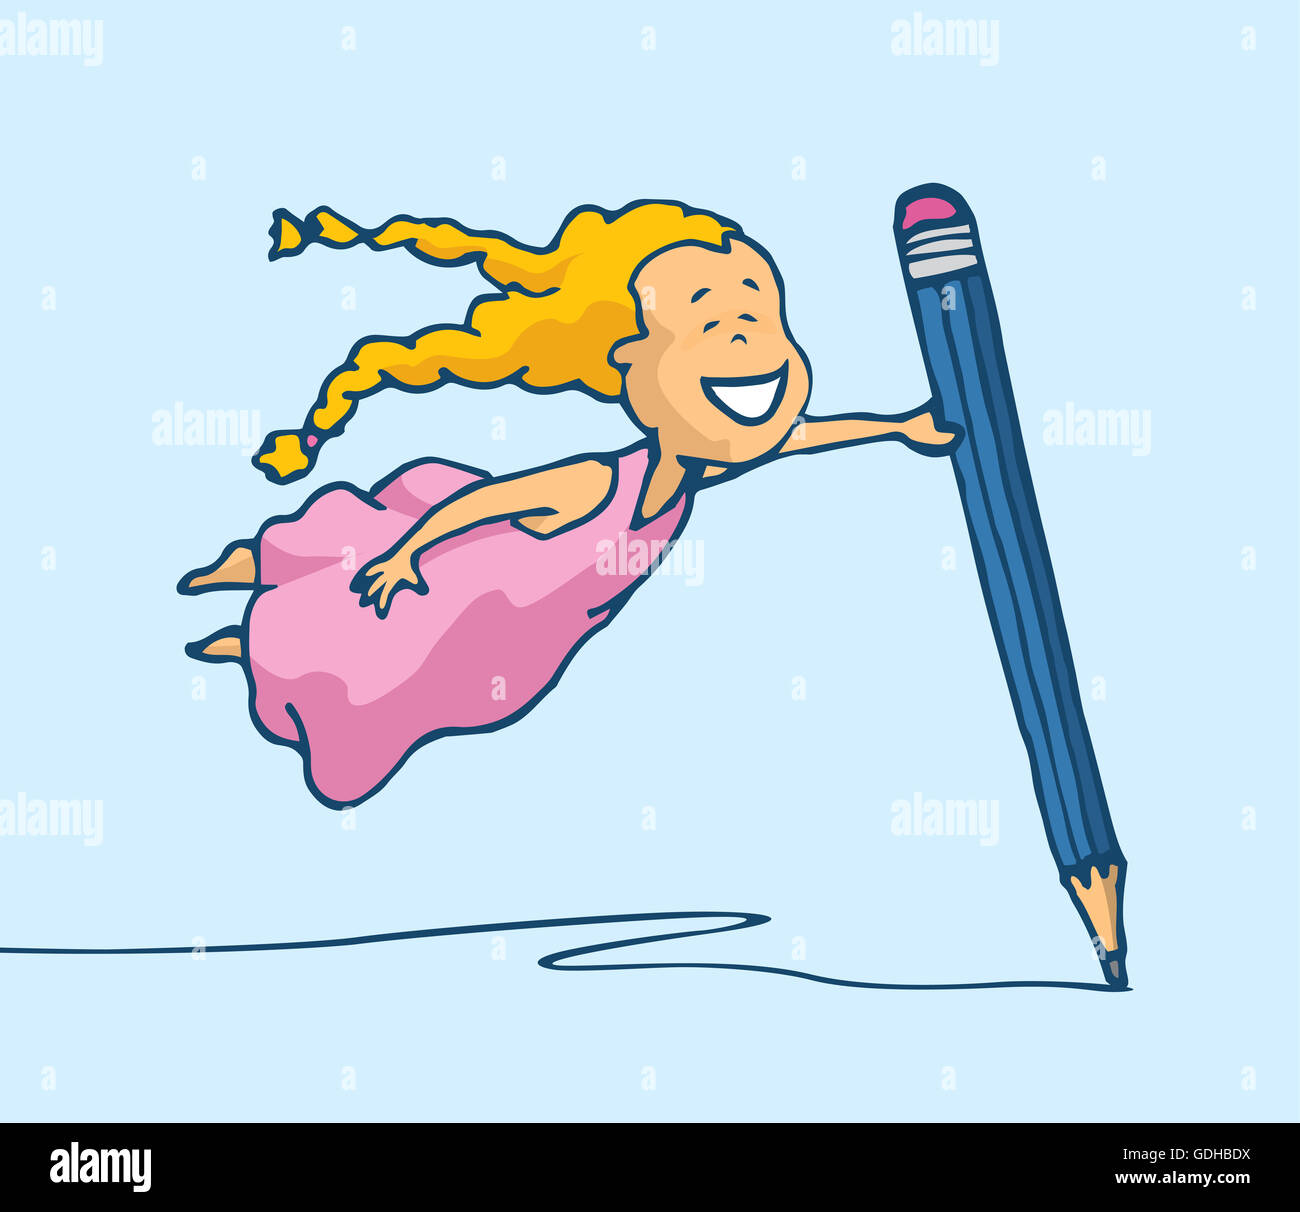 Cartoon illustration of flying creative girl drawing with huge pencil Stock Photo